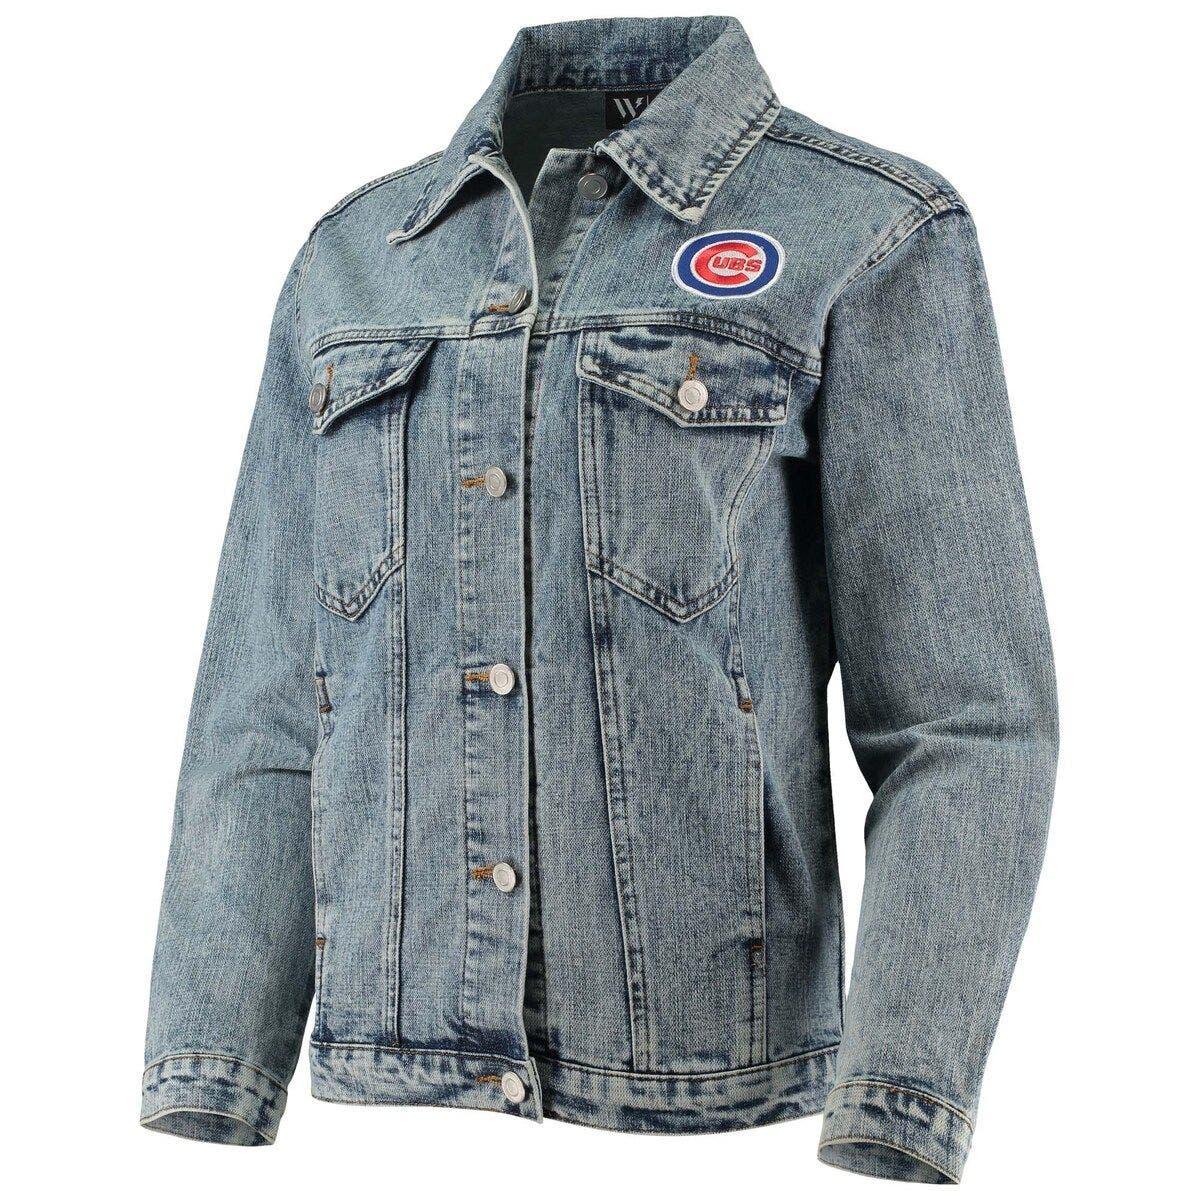 The Wild Collective Chicago Cubs Team Patch Denim Button-up Jacket in Blue